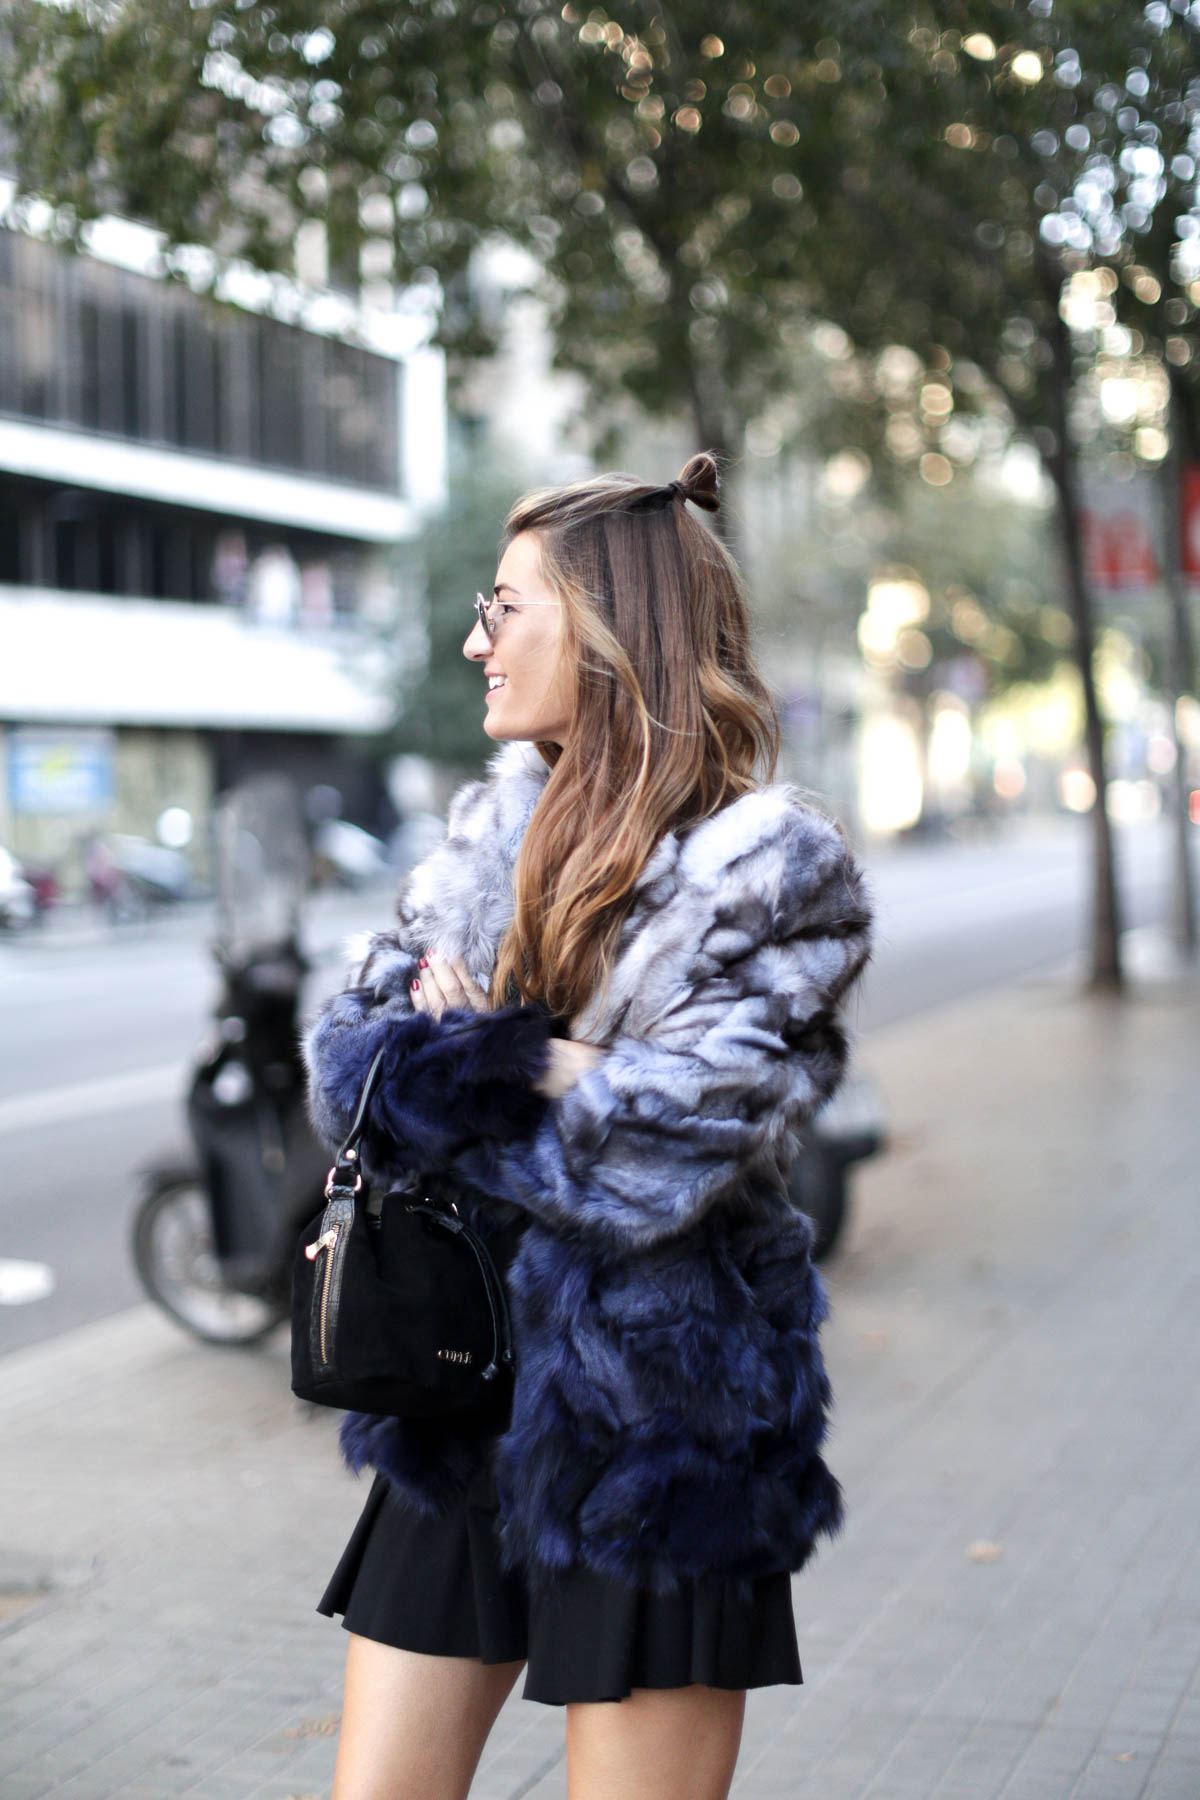 barcelona-fur-cuple-mini-skirt-ankle-boots-streetstyle-look-bartabac-outfit-moda-blogger-7